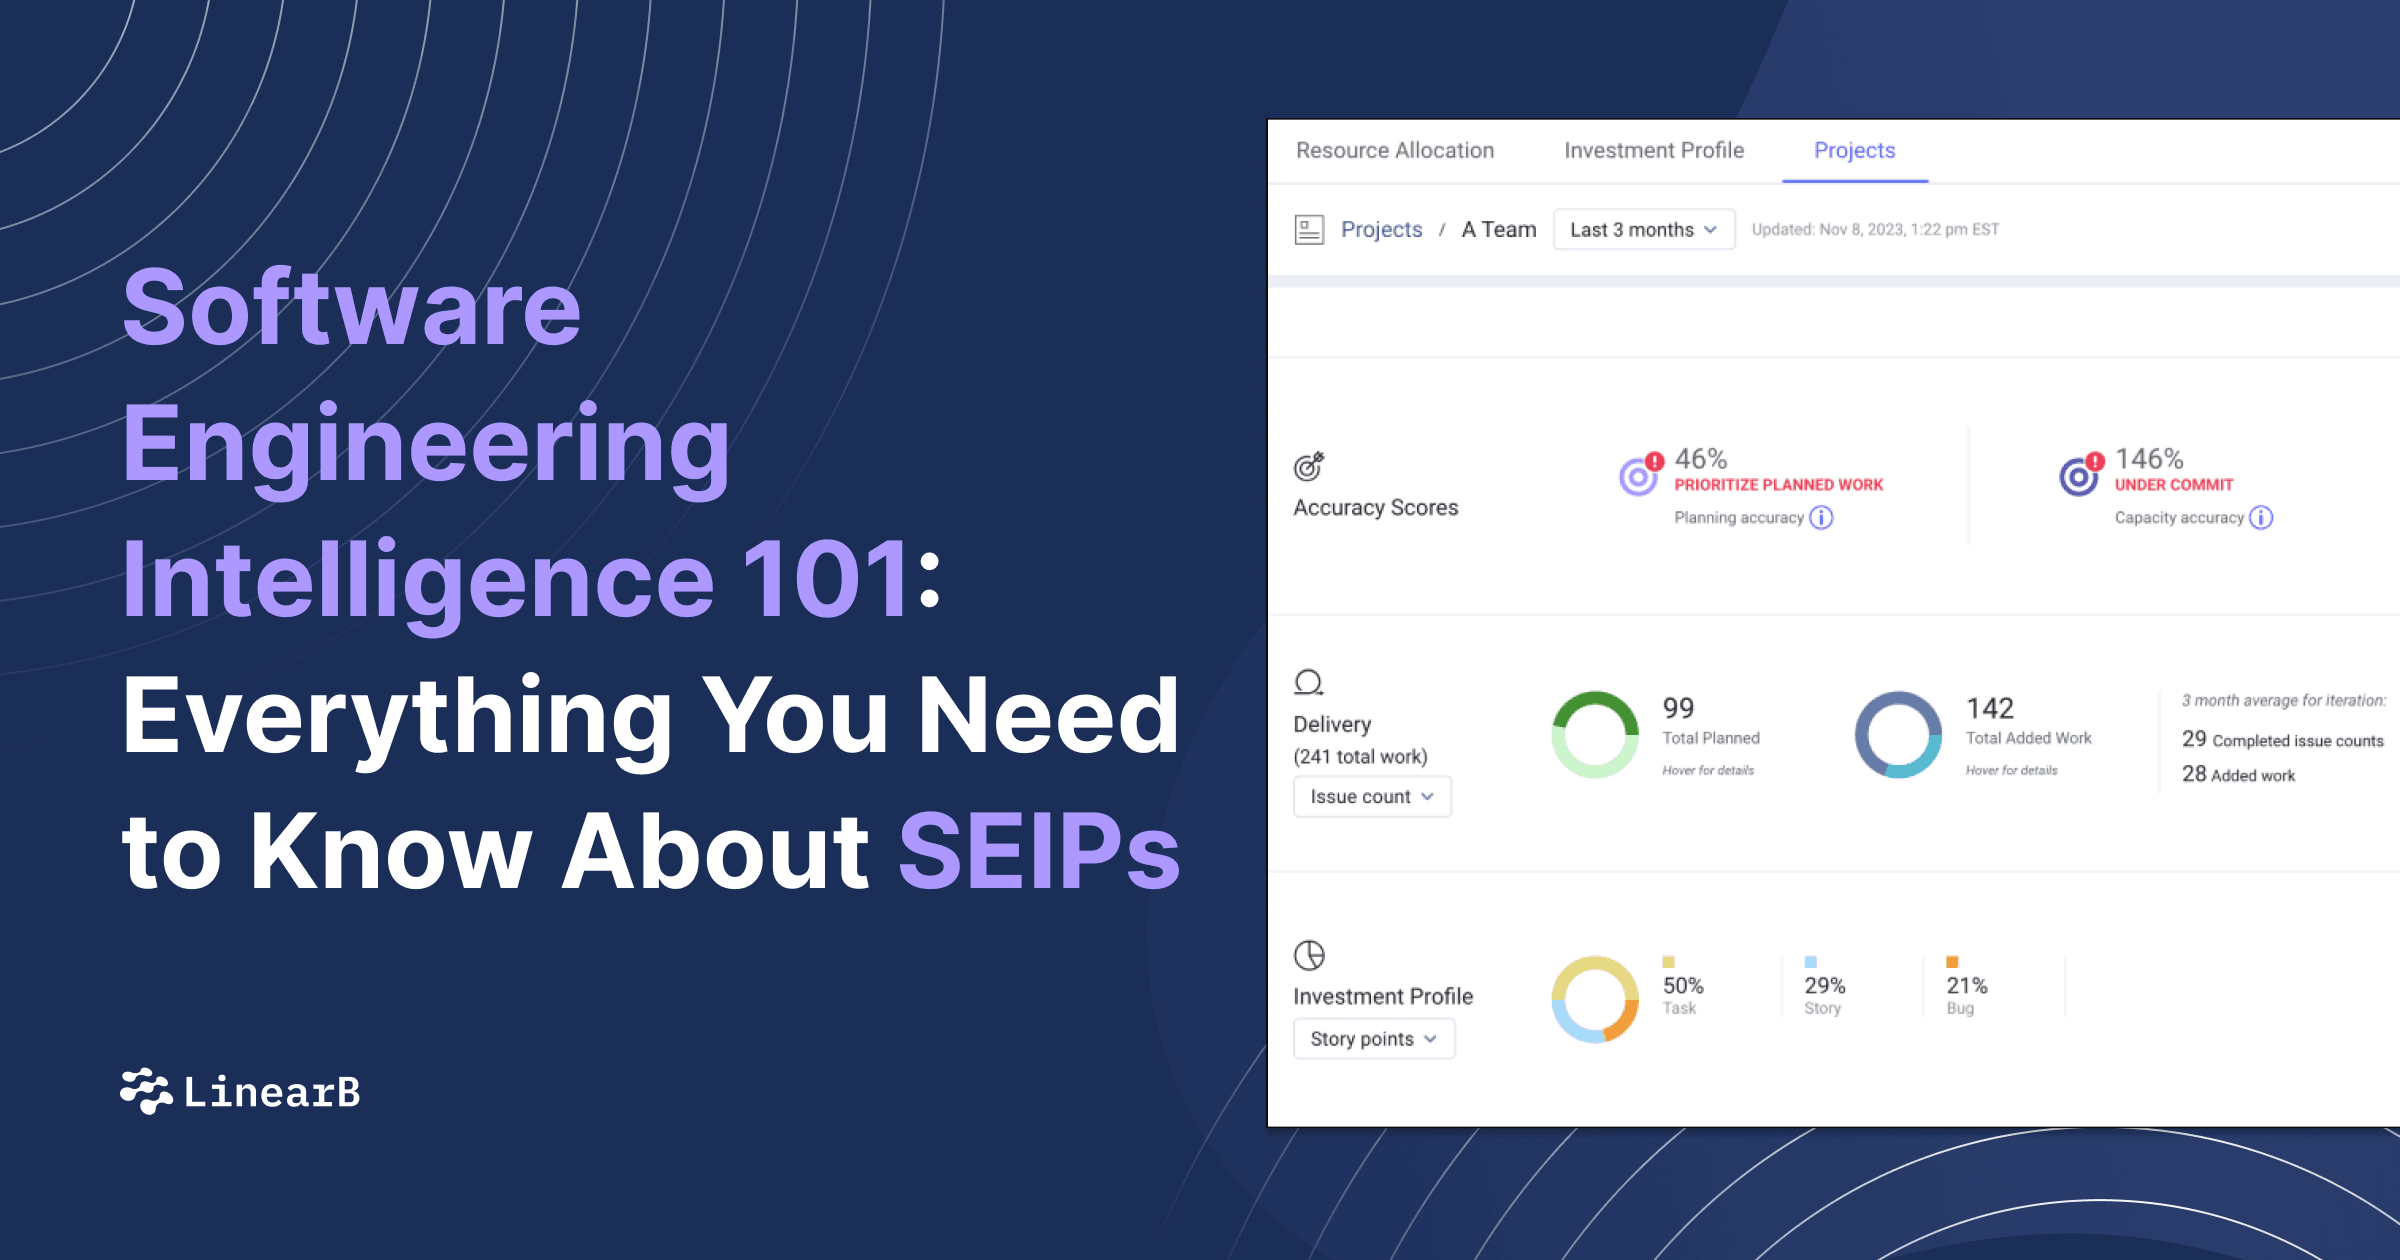 Software Engineering Intelligence 101 - Everything You Need to Know About SEIPs